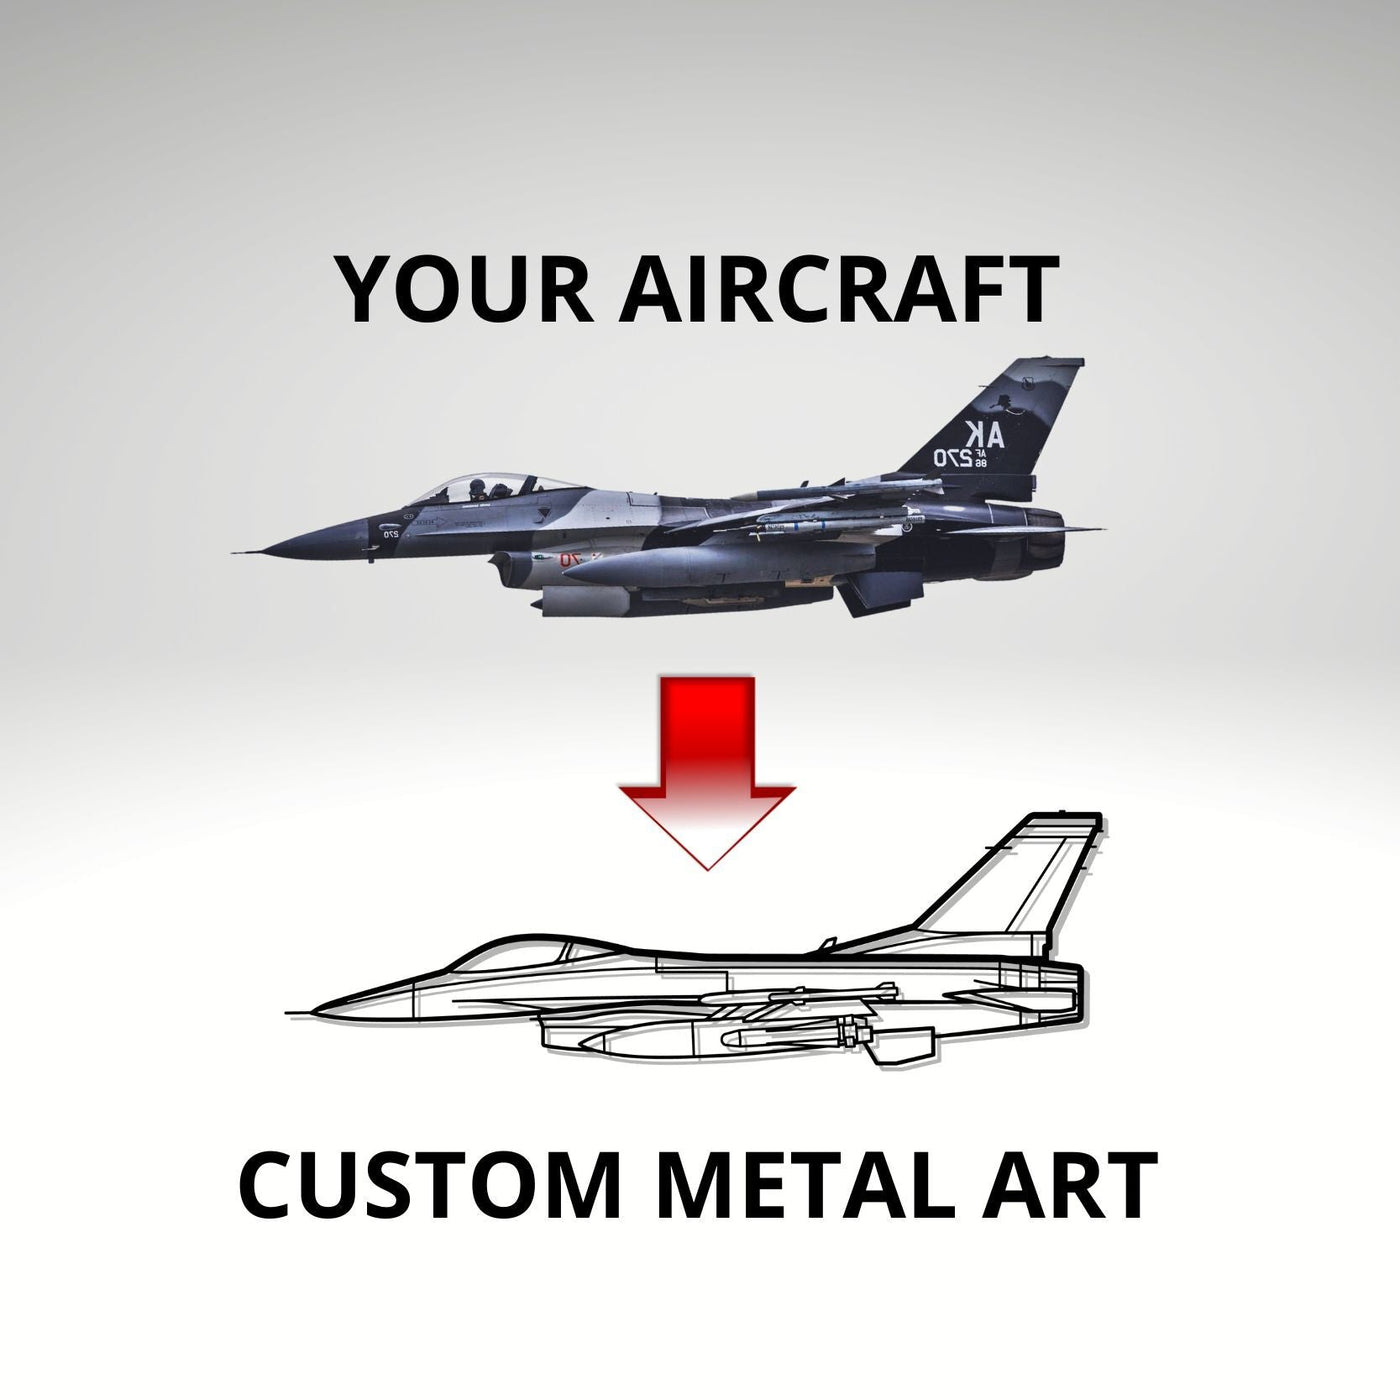 RV-12iS Front Silhouette Metal Wall Art